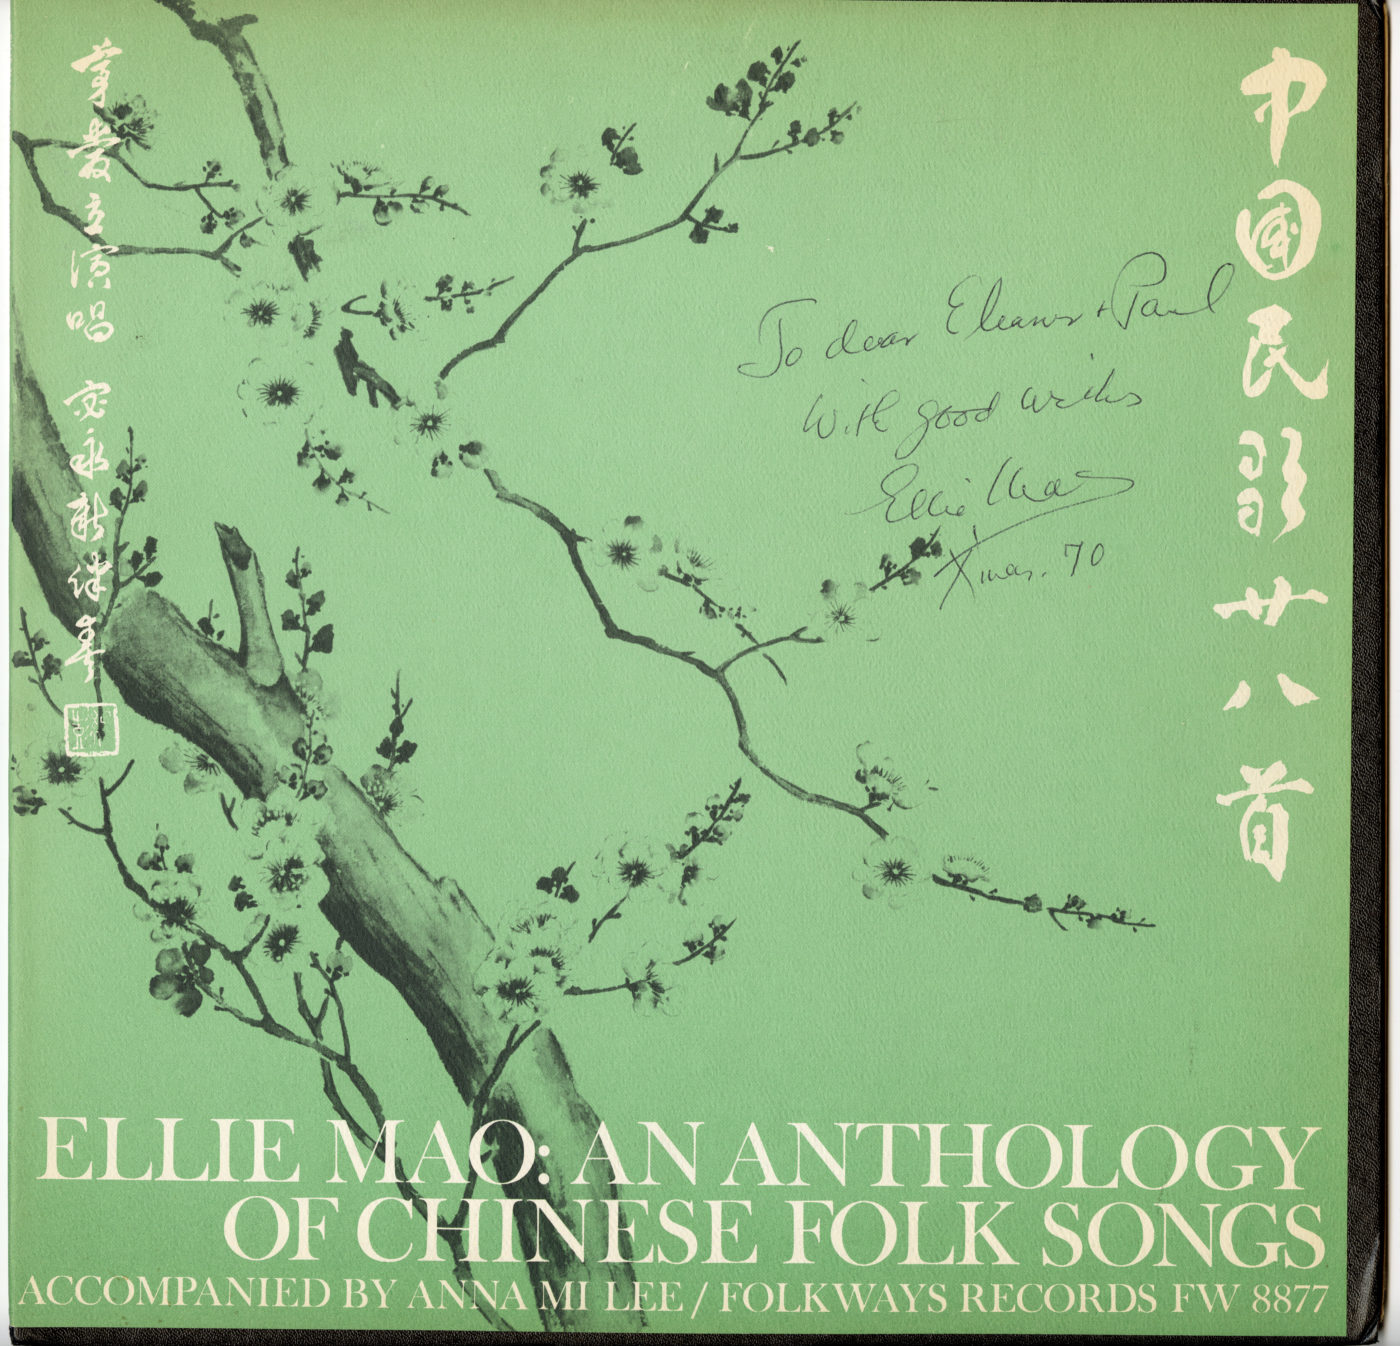 Front of album jacket of Ellie Mao: An Anthology of Chinese Folk Songs, Accompanied by Anna Mi Lee. Courtesy of Eleanor Wu Clifford, Museum of Chinese in America (MOCA) Collection.